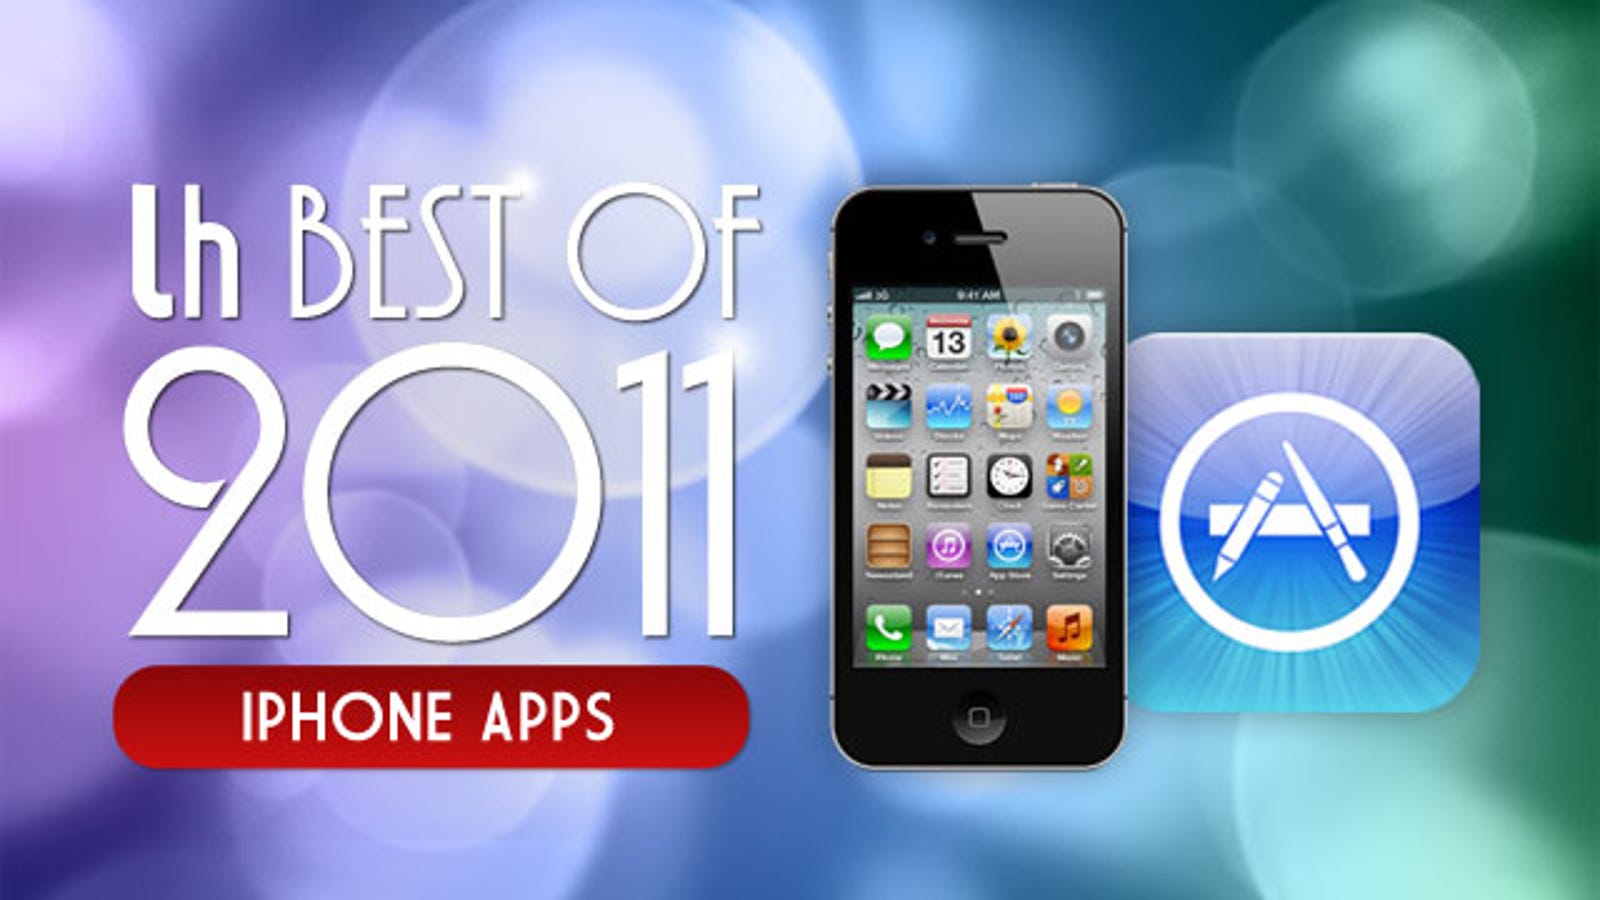 Most Popular iPhone Apps and Posts